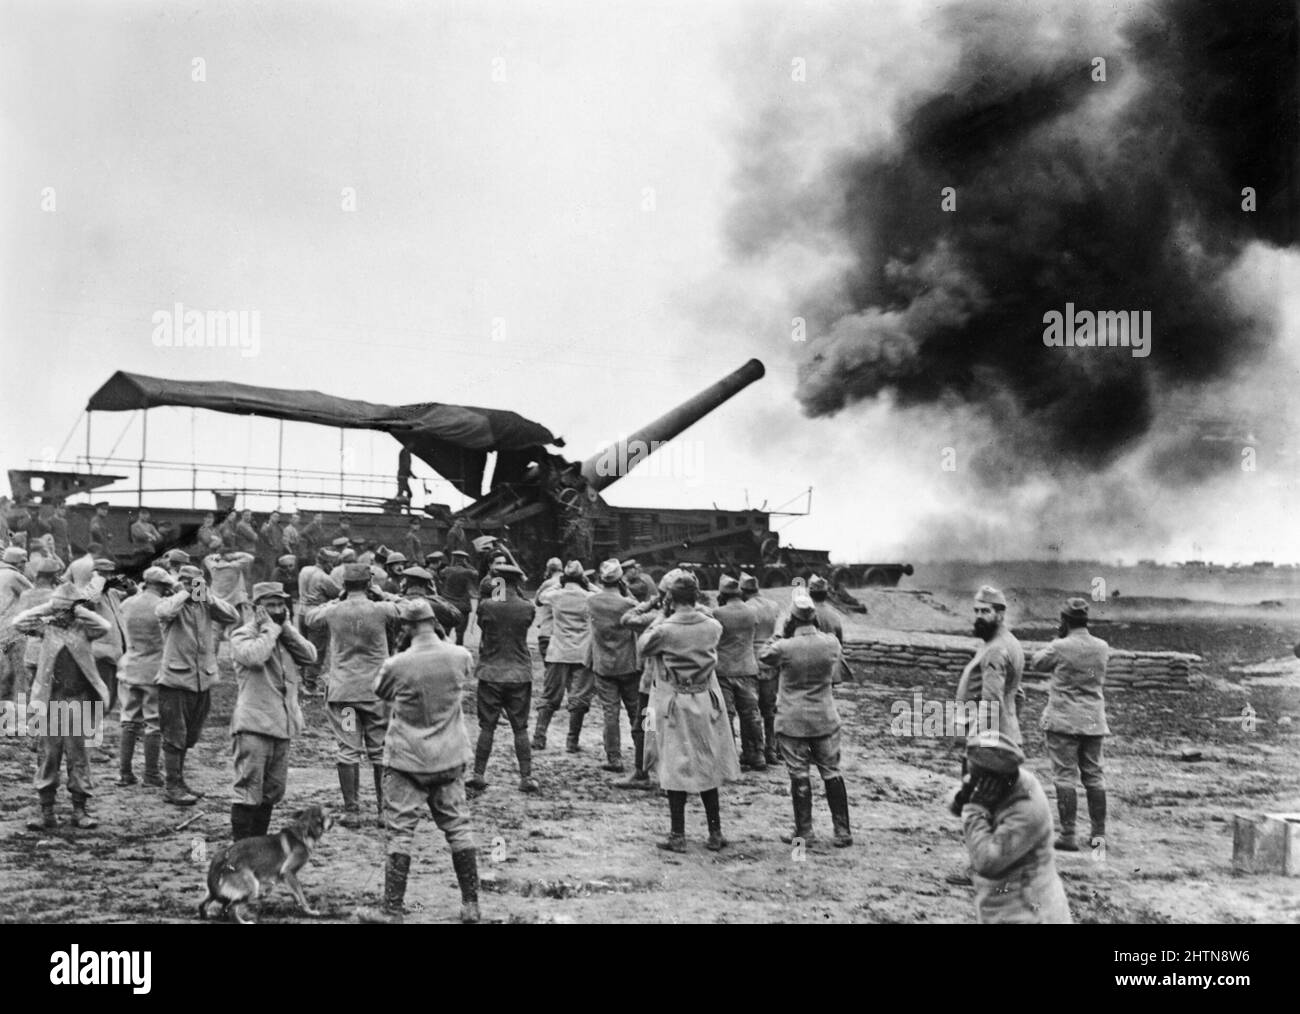 he Battle of the Somme, July-november 1916 12 inch Mark IX gun of the Royal Garrison Artillery (on a railway mounting) firing a shot near Meaulte, August 1916. In the foreground, a group of watching French soldiers cover their ears against the blast. Stock Photo